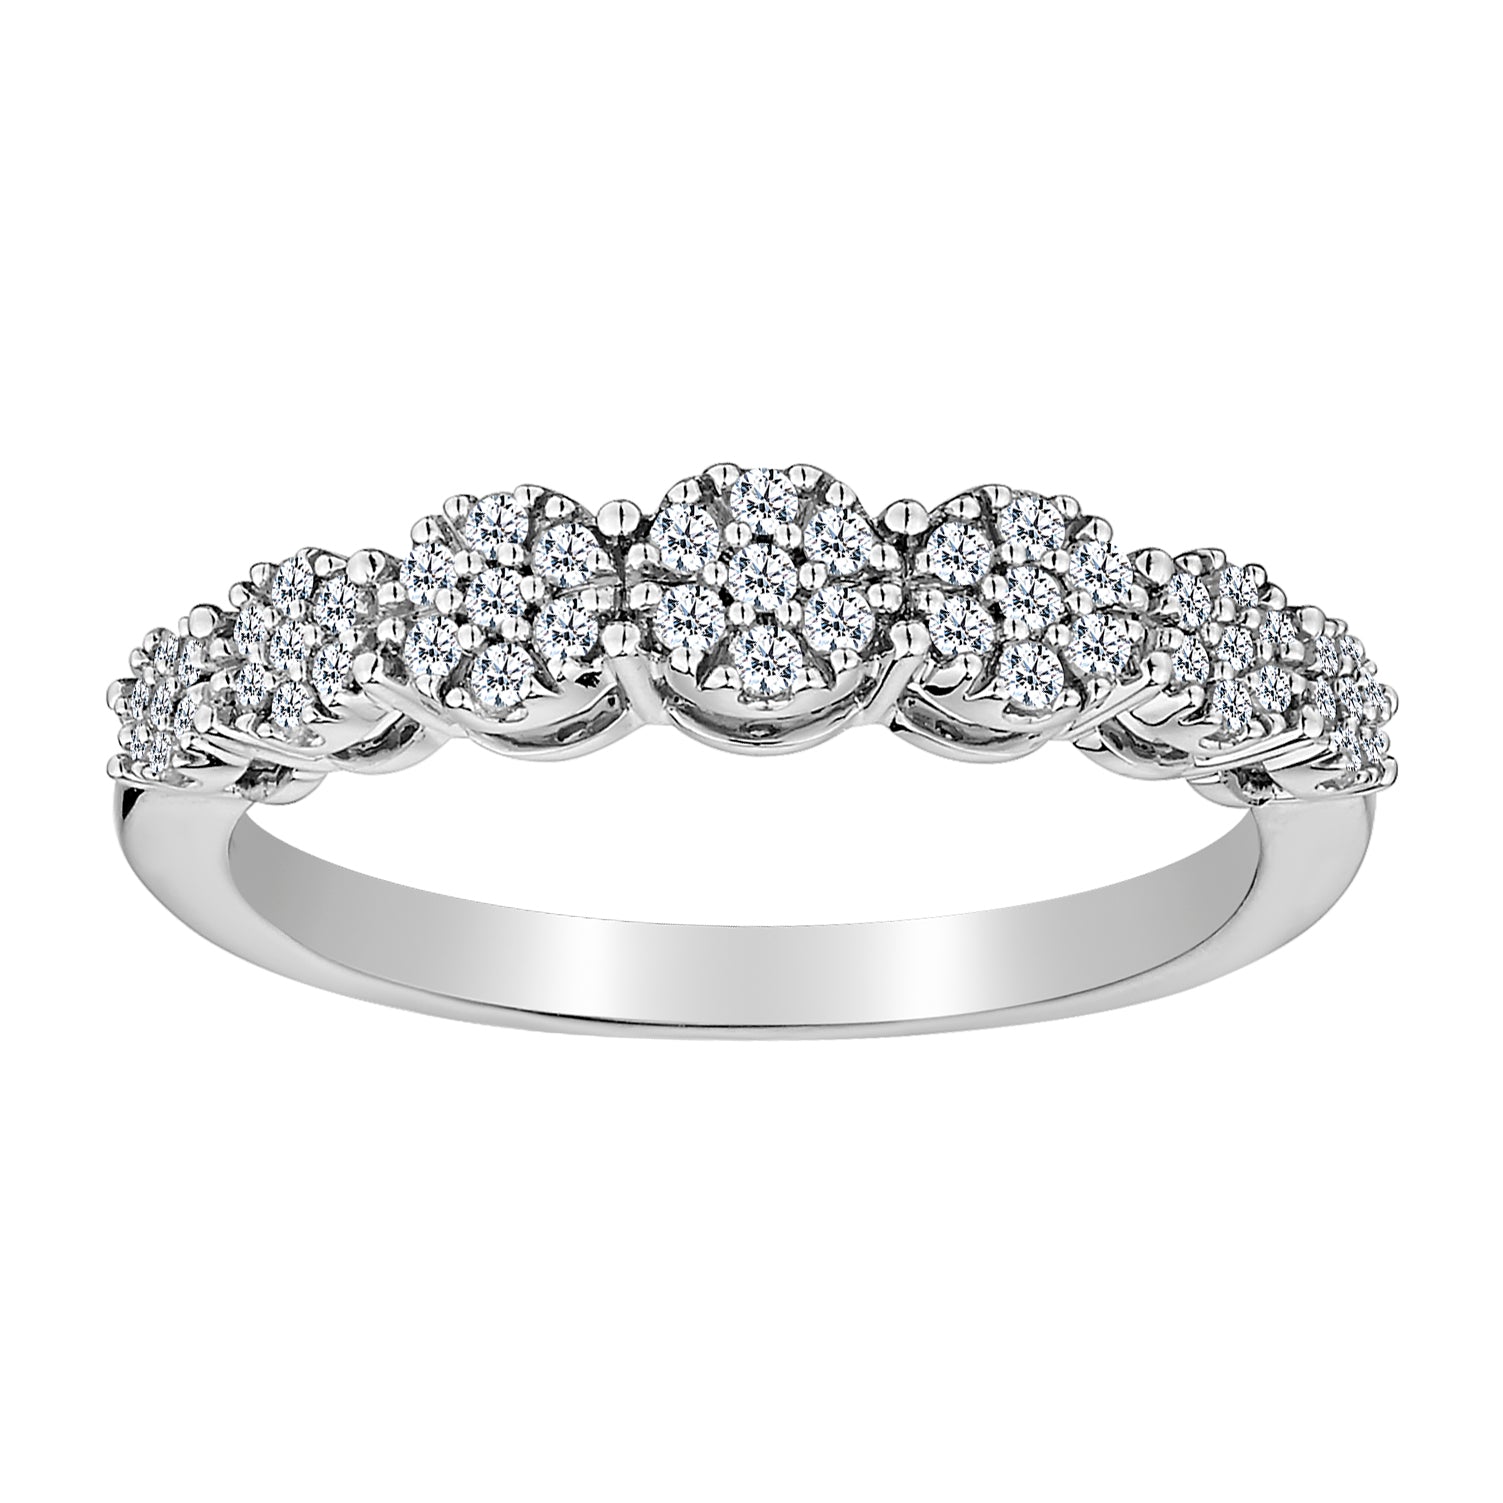 Diamond Rings | Griffin Jewellery Designs | Page 5